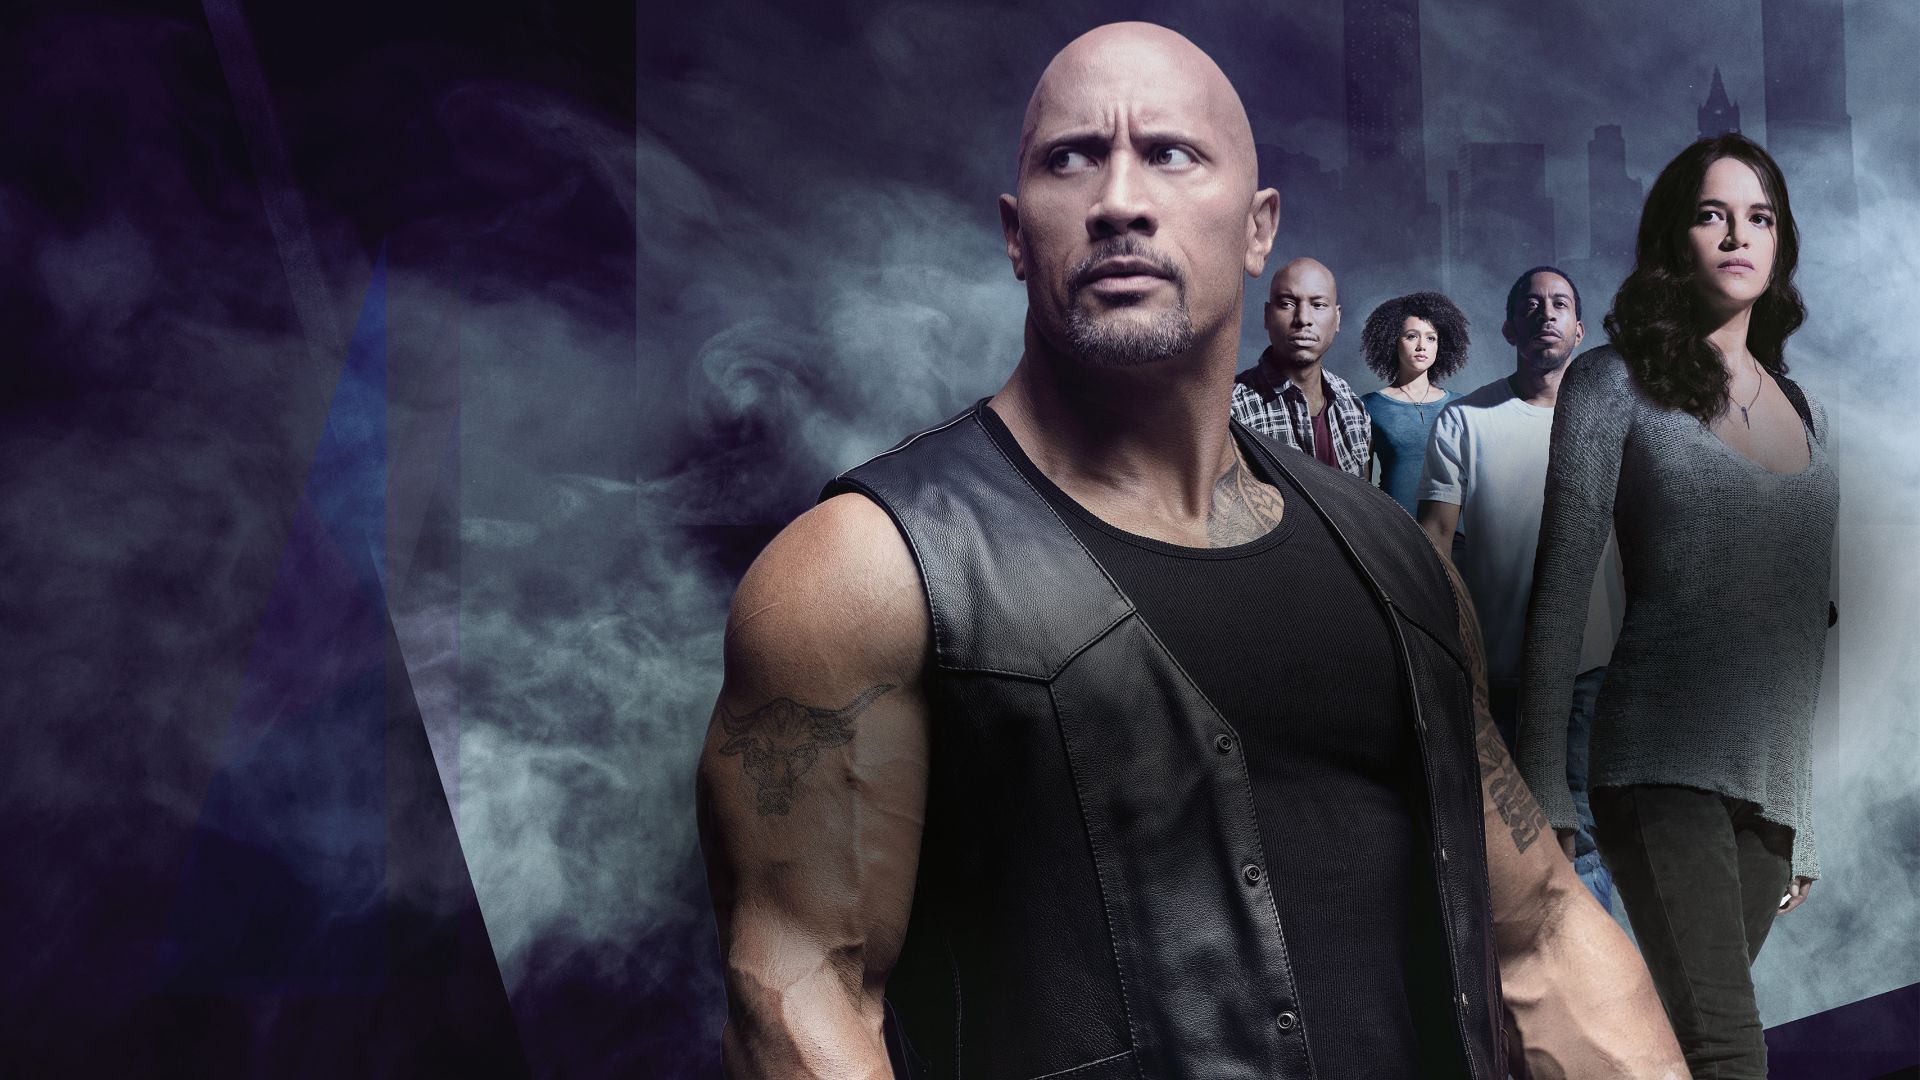 Wallpaper The fate of the furious, movie, Dwayne Johnson, Michelle Rodriguez